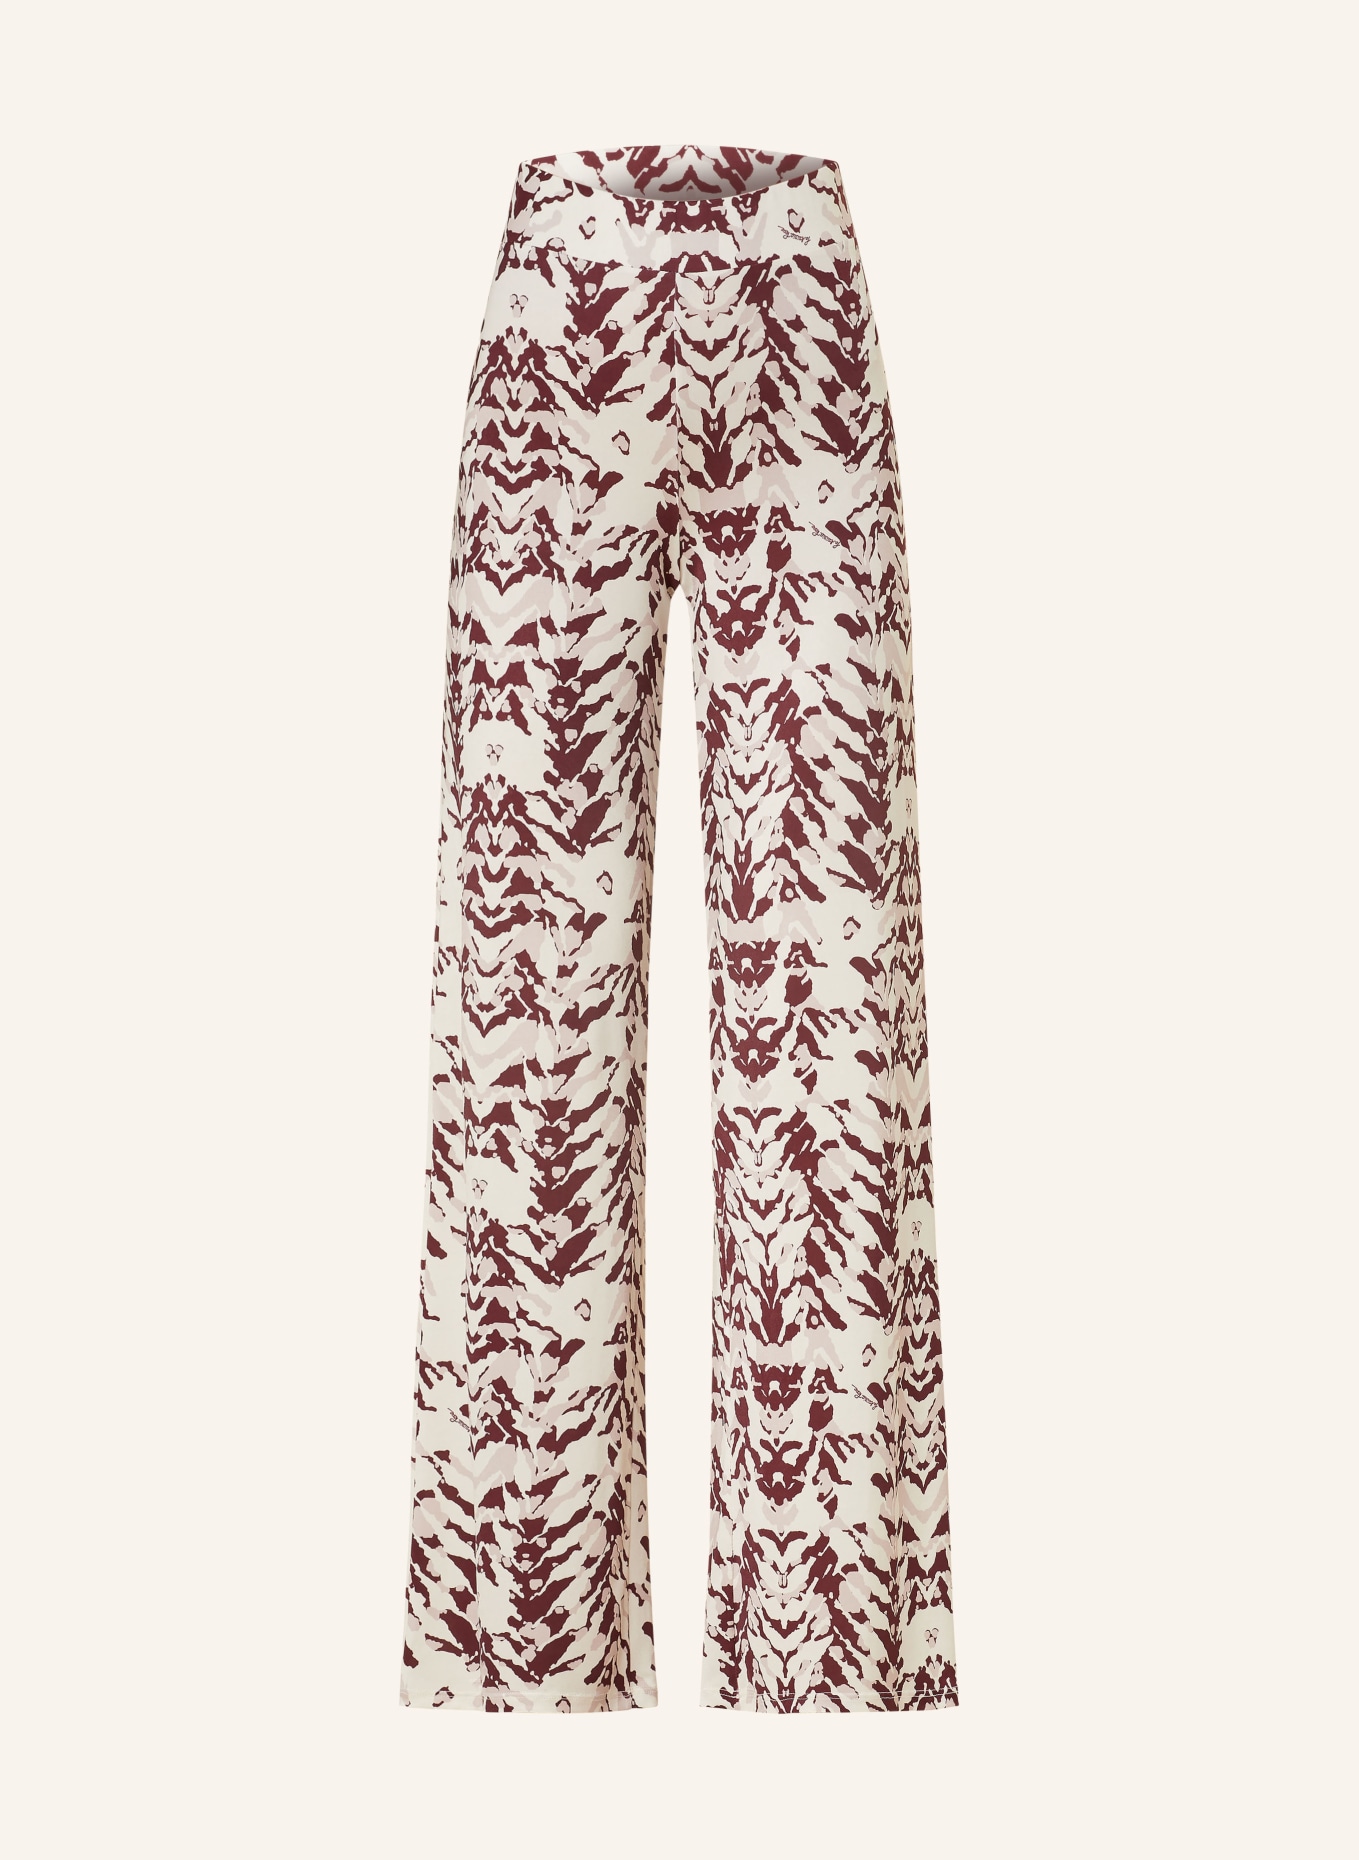 PATRIZIA PEPE Wide leg trousers made of jersey, Color: DUSKY PINK/ CREAM/ DARK RED (Image 1)